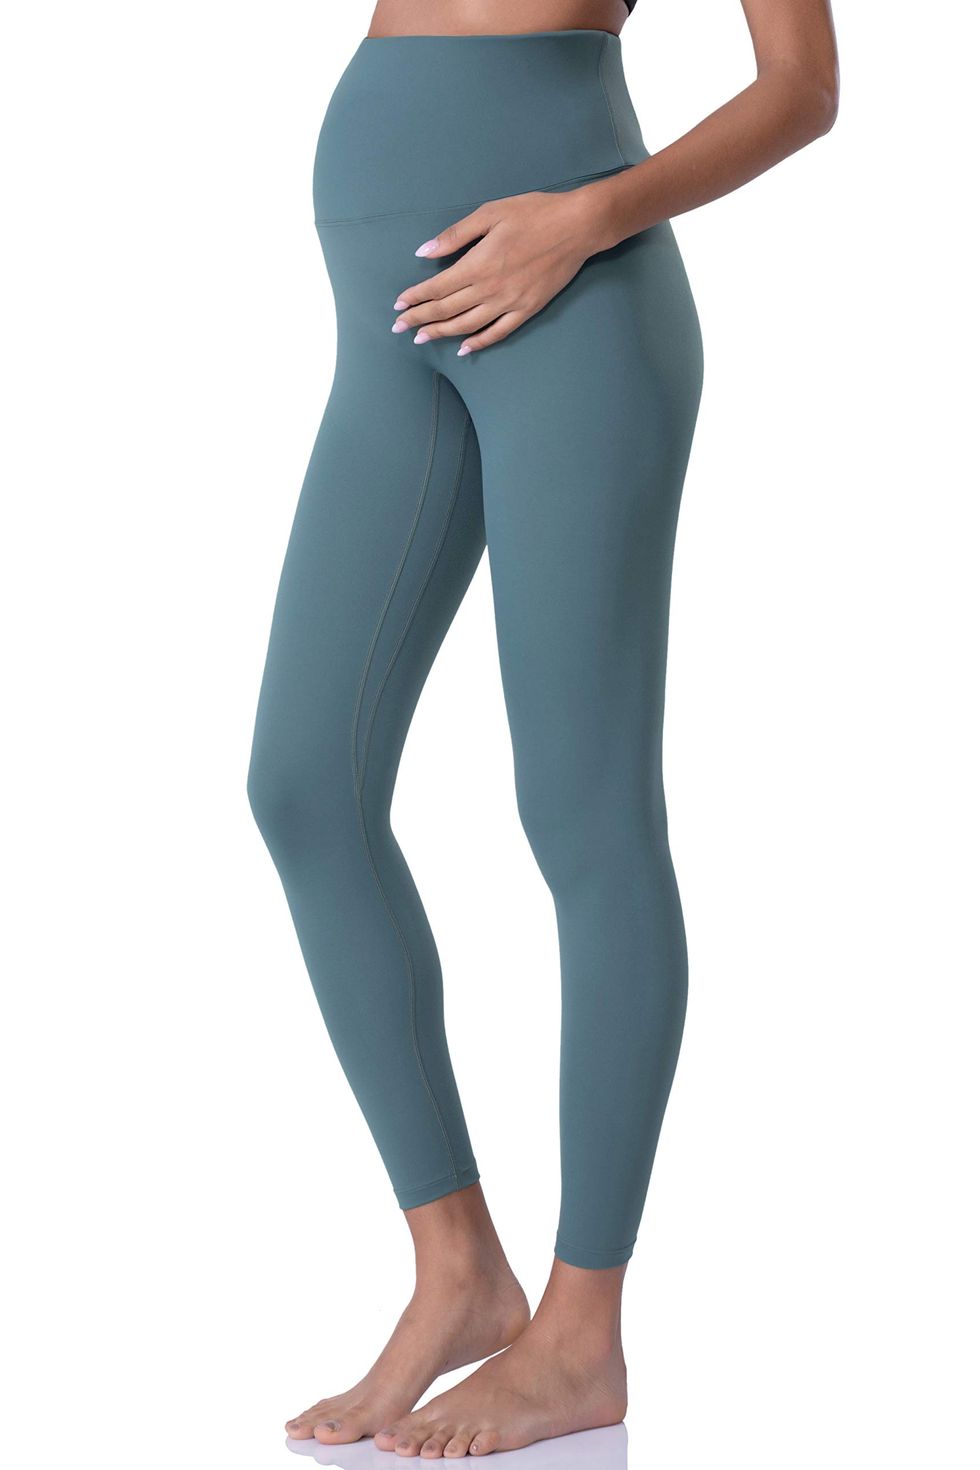 JOYSPELS Maternity Leggings Over The Belly with Pockets Non-See-Through  Workout.